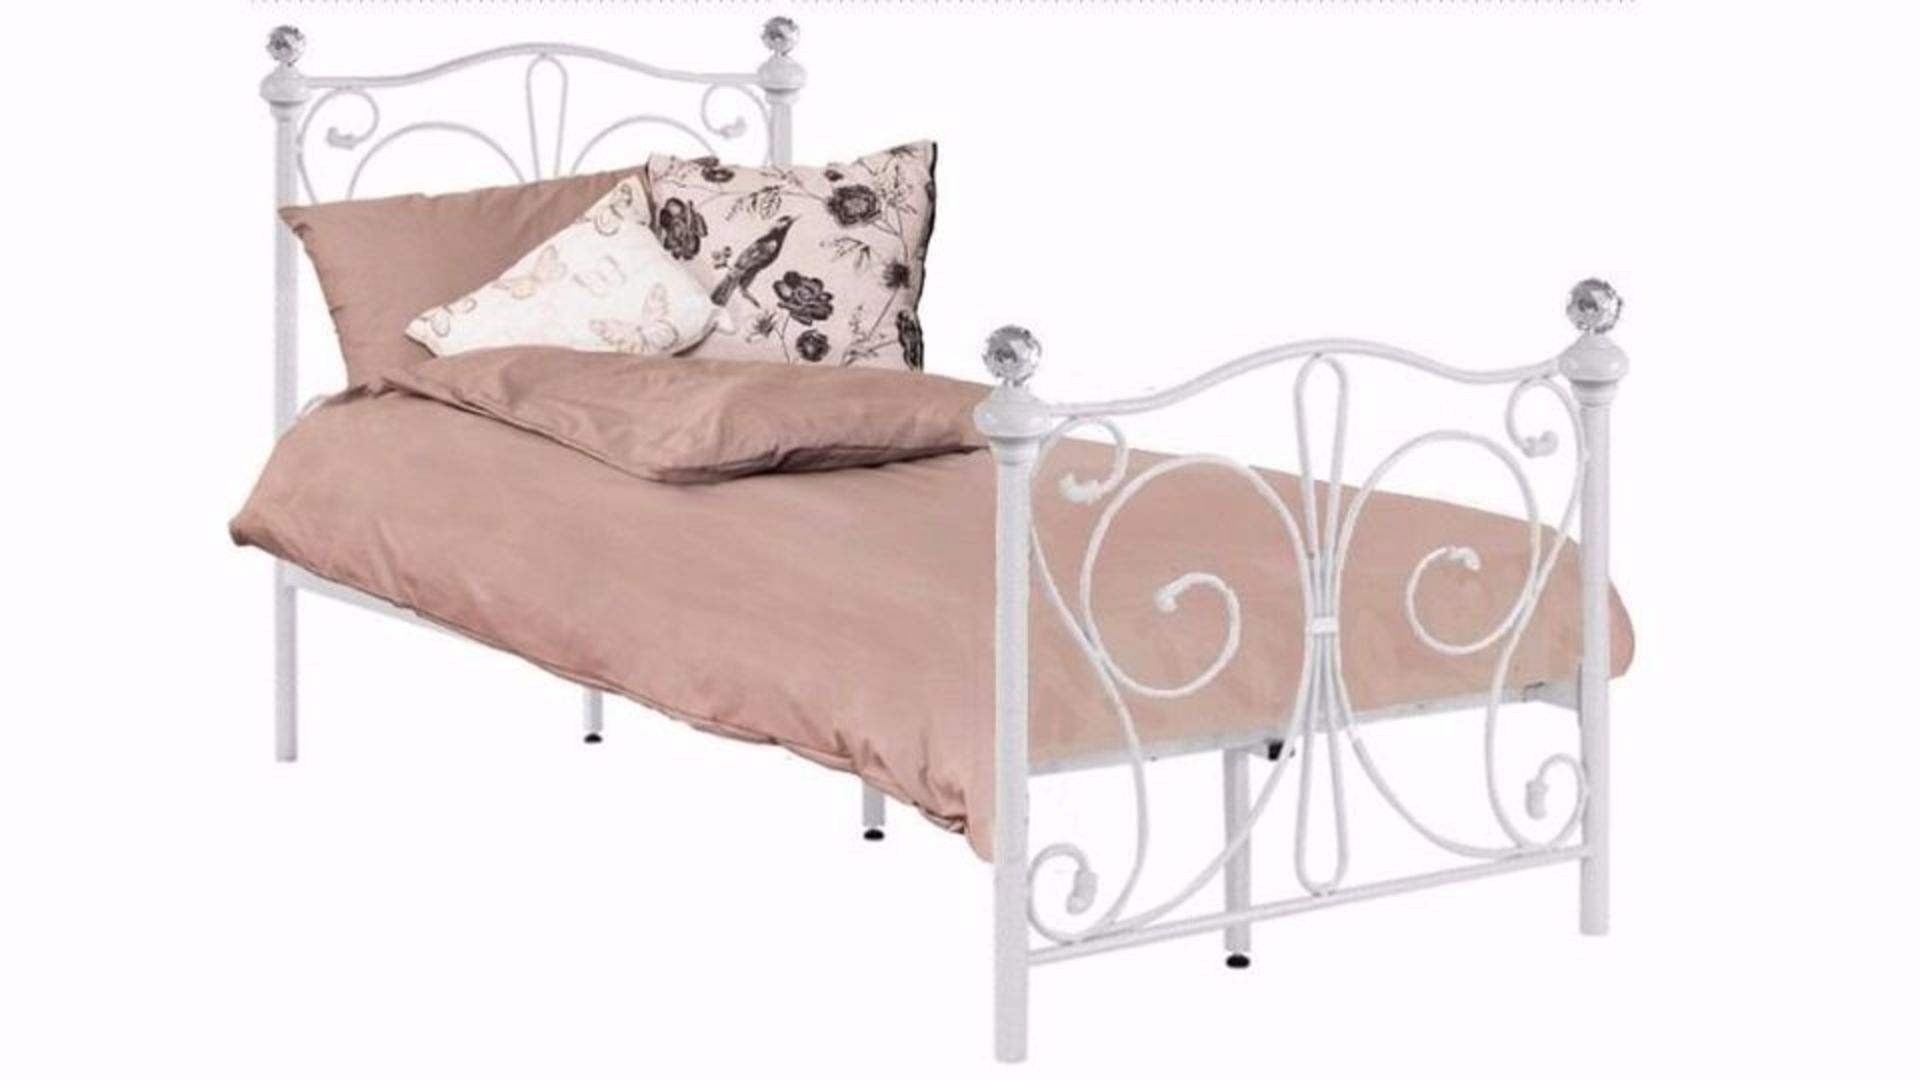 WHITE SINGLE METAL BED FRAME WITH CRYSTAL FINIALS